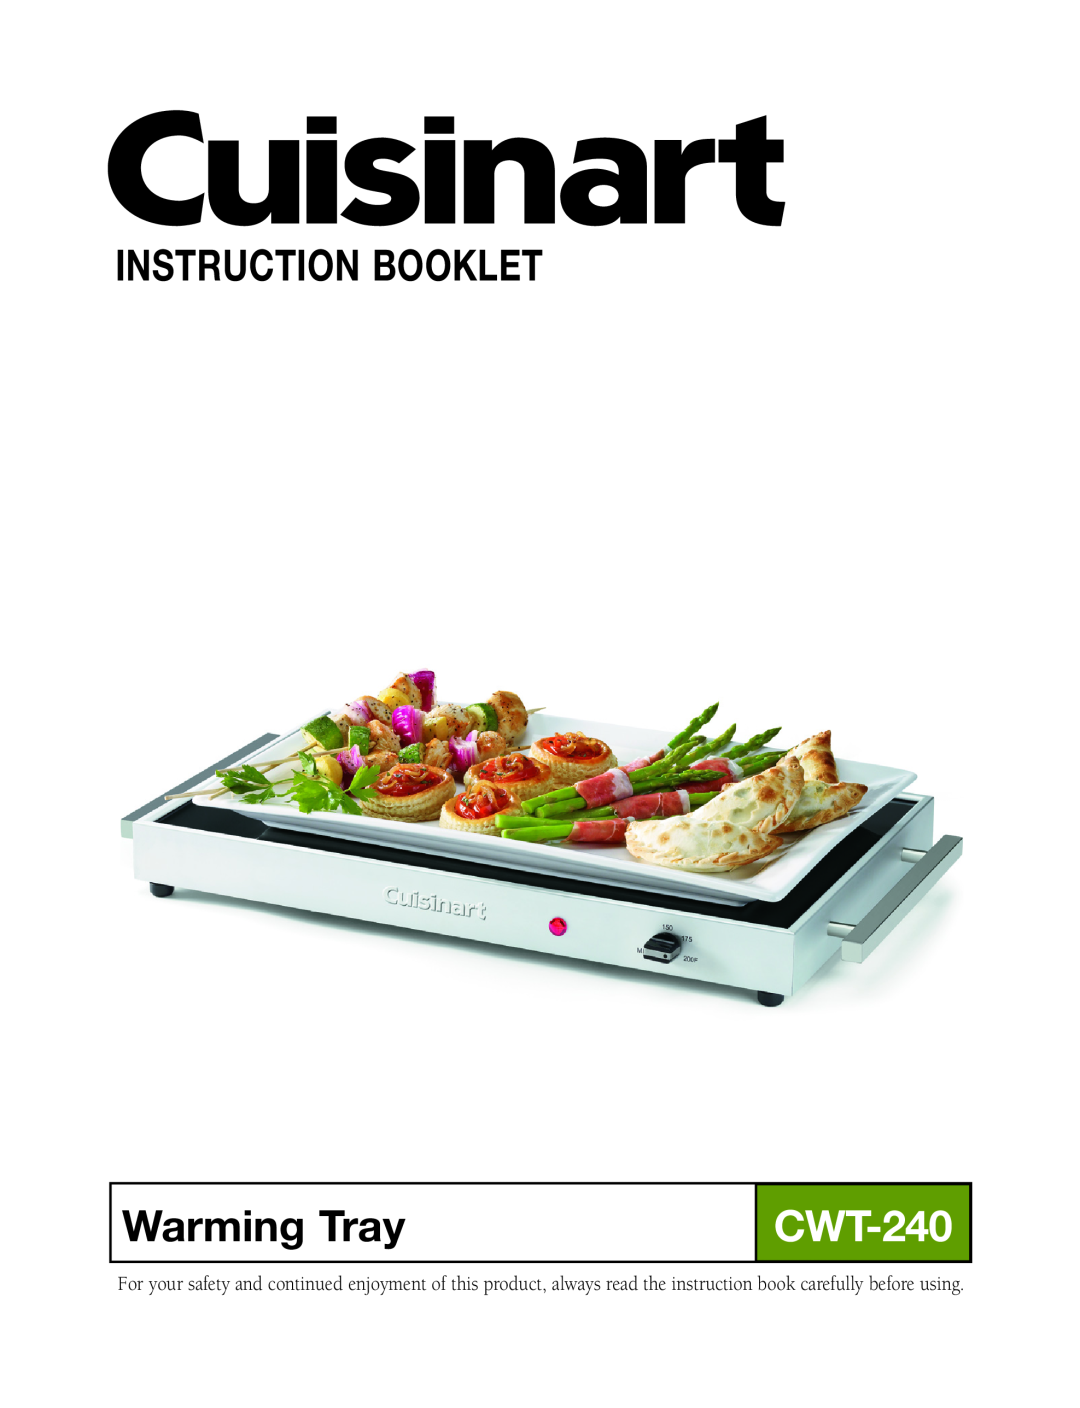 Cuisinart CWT-240 manual Instruction Booklet, Warming Tray 